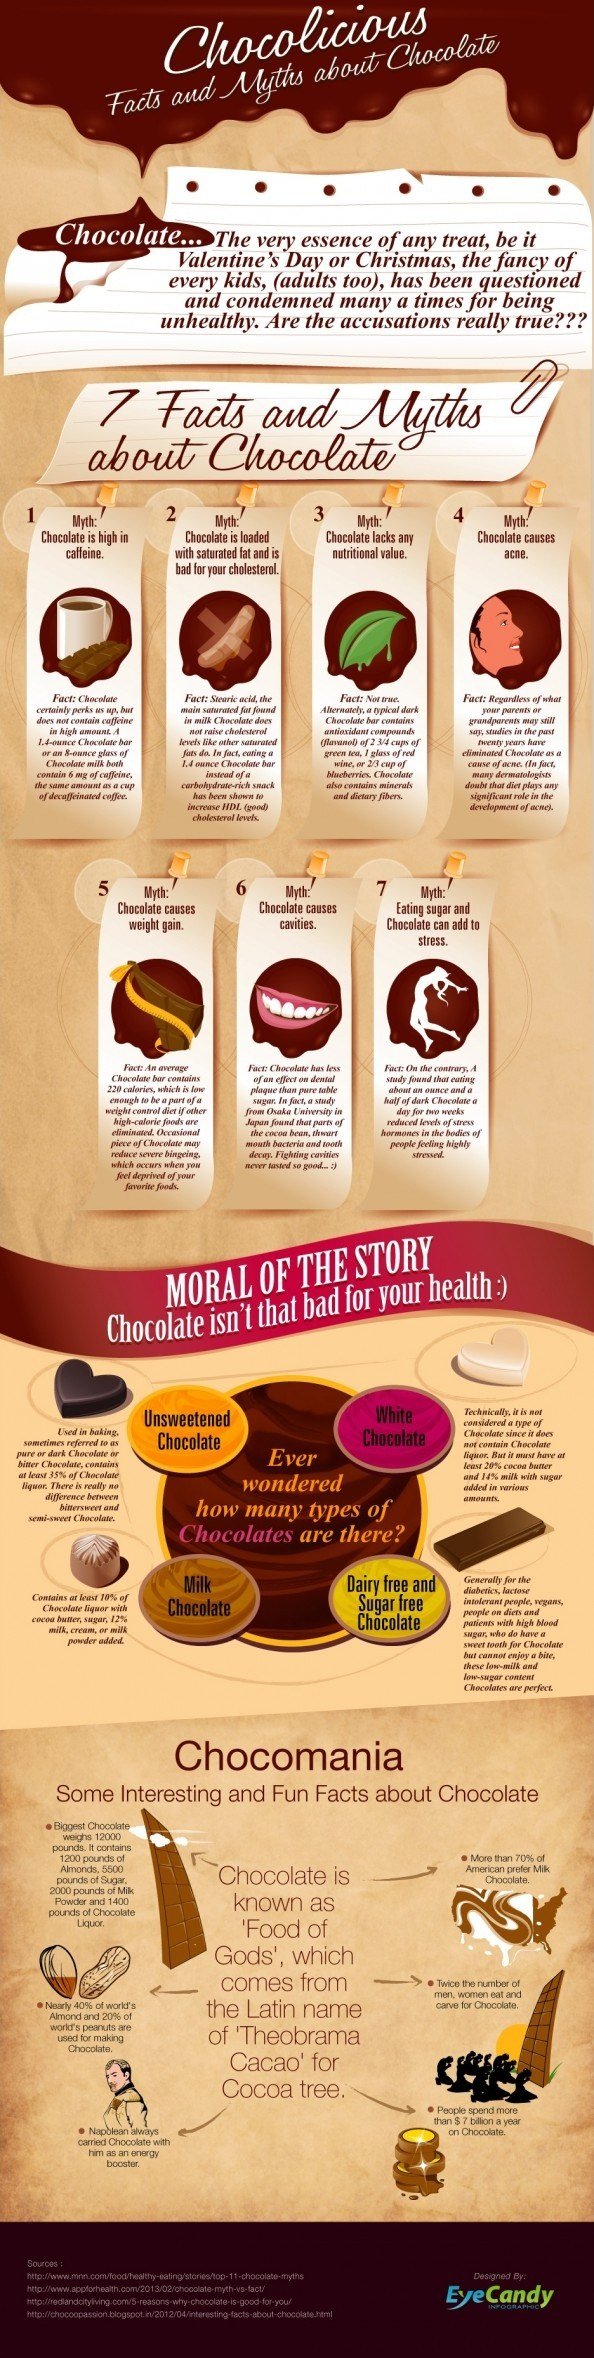 facts-about-chocolate1